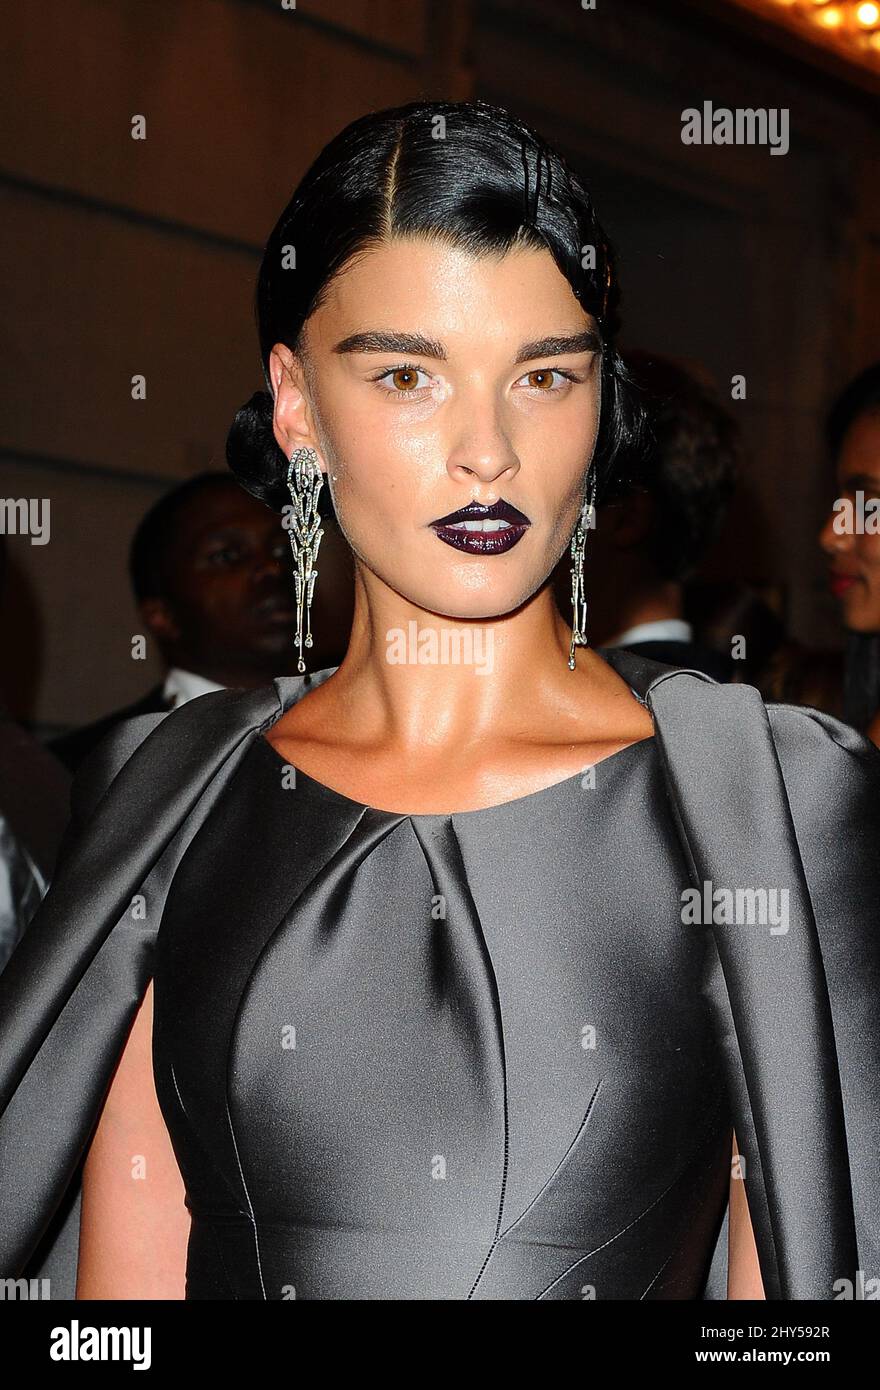 Crystal Renn attending the Harper's BAZAAR Celebrates Icons by Carine Roitfeld party in New York, USA. Stock Photo